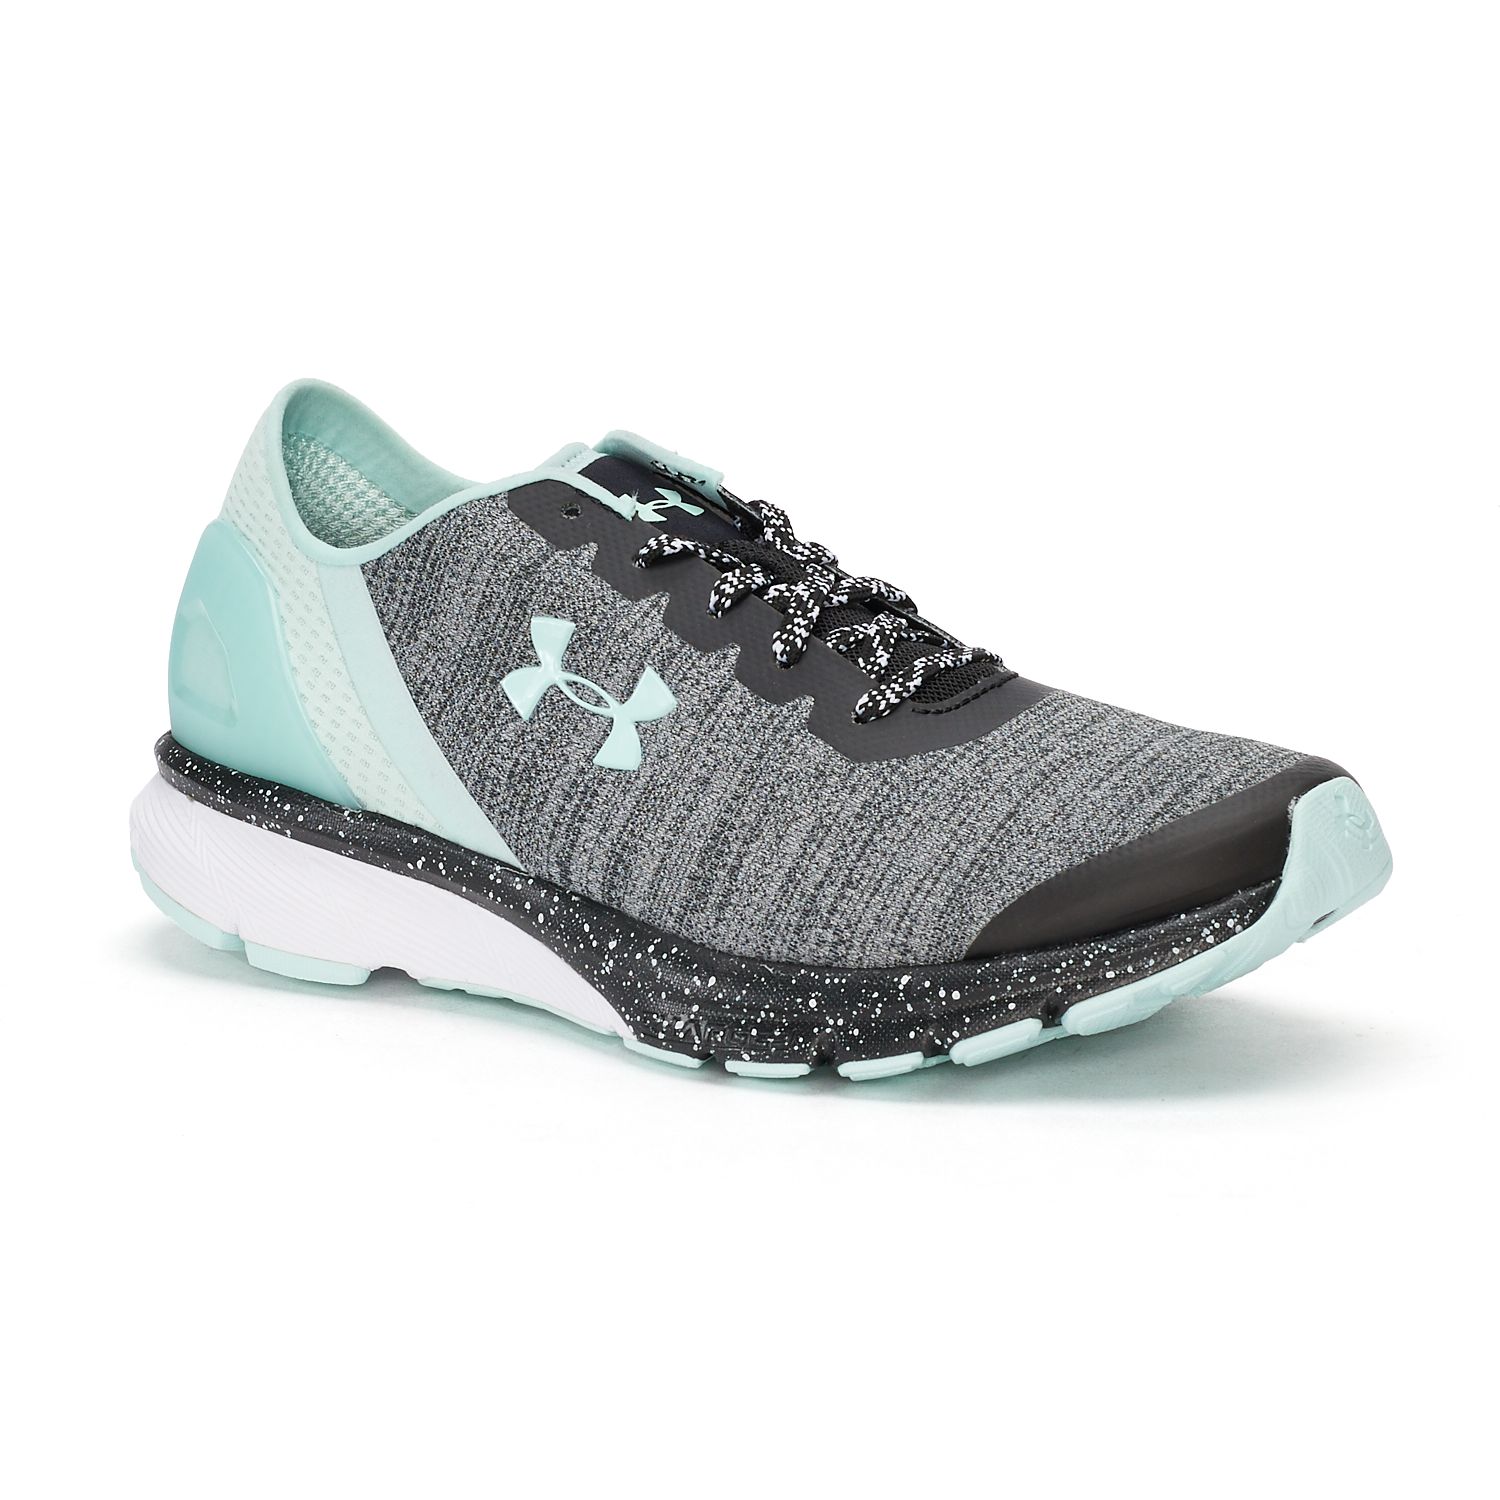 women's charged escape running shoe